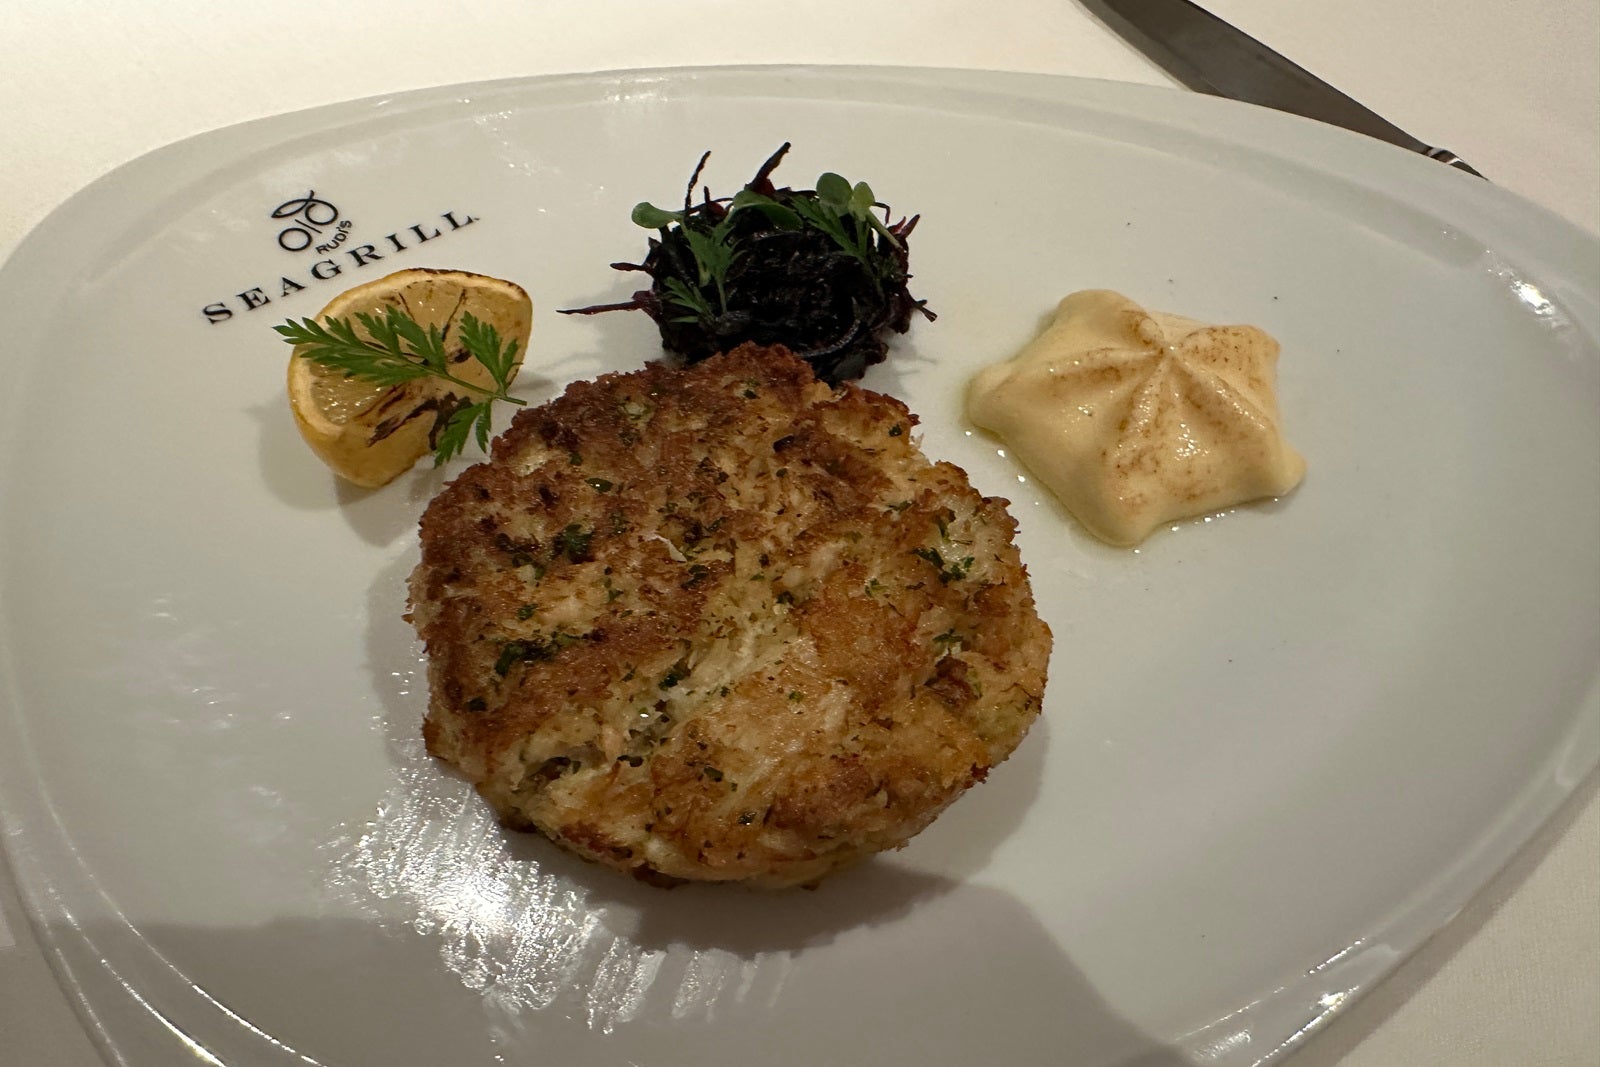 A crab cake on a white plate with side sauces and garnishes